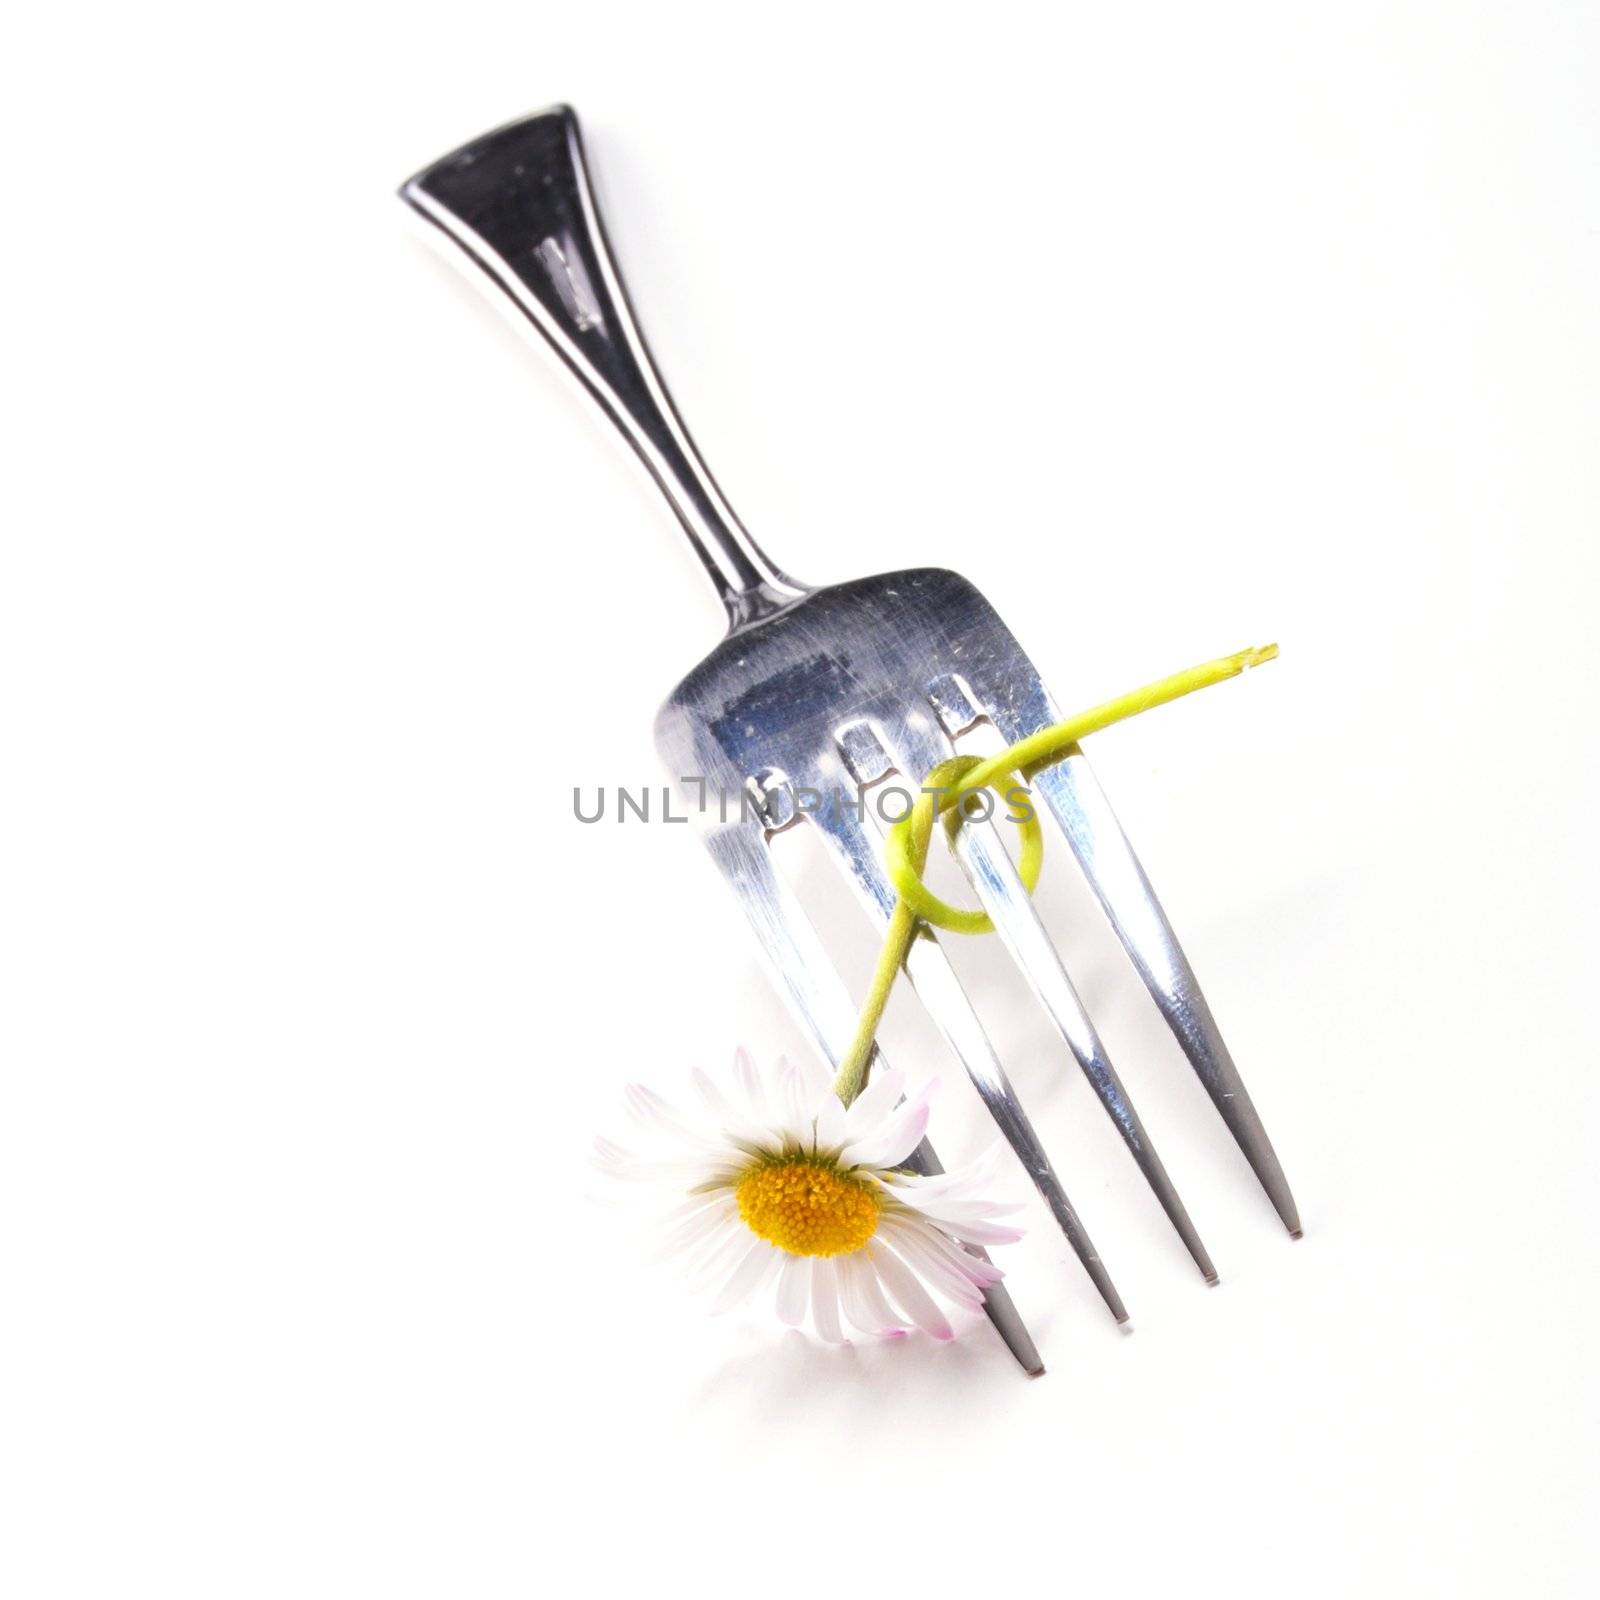 flower and fork by gunnar3000